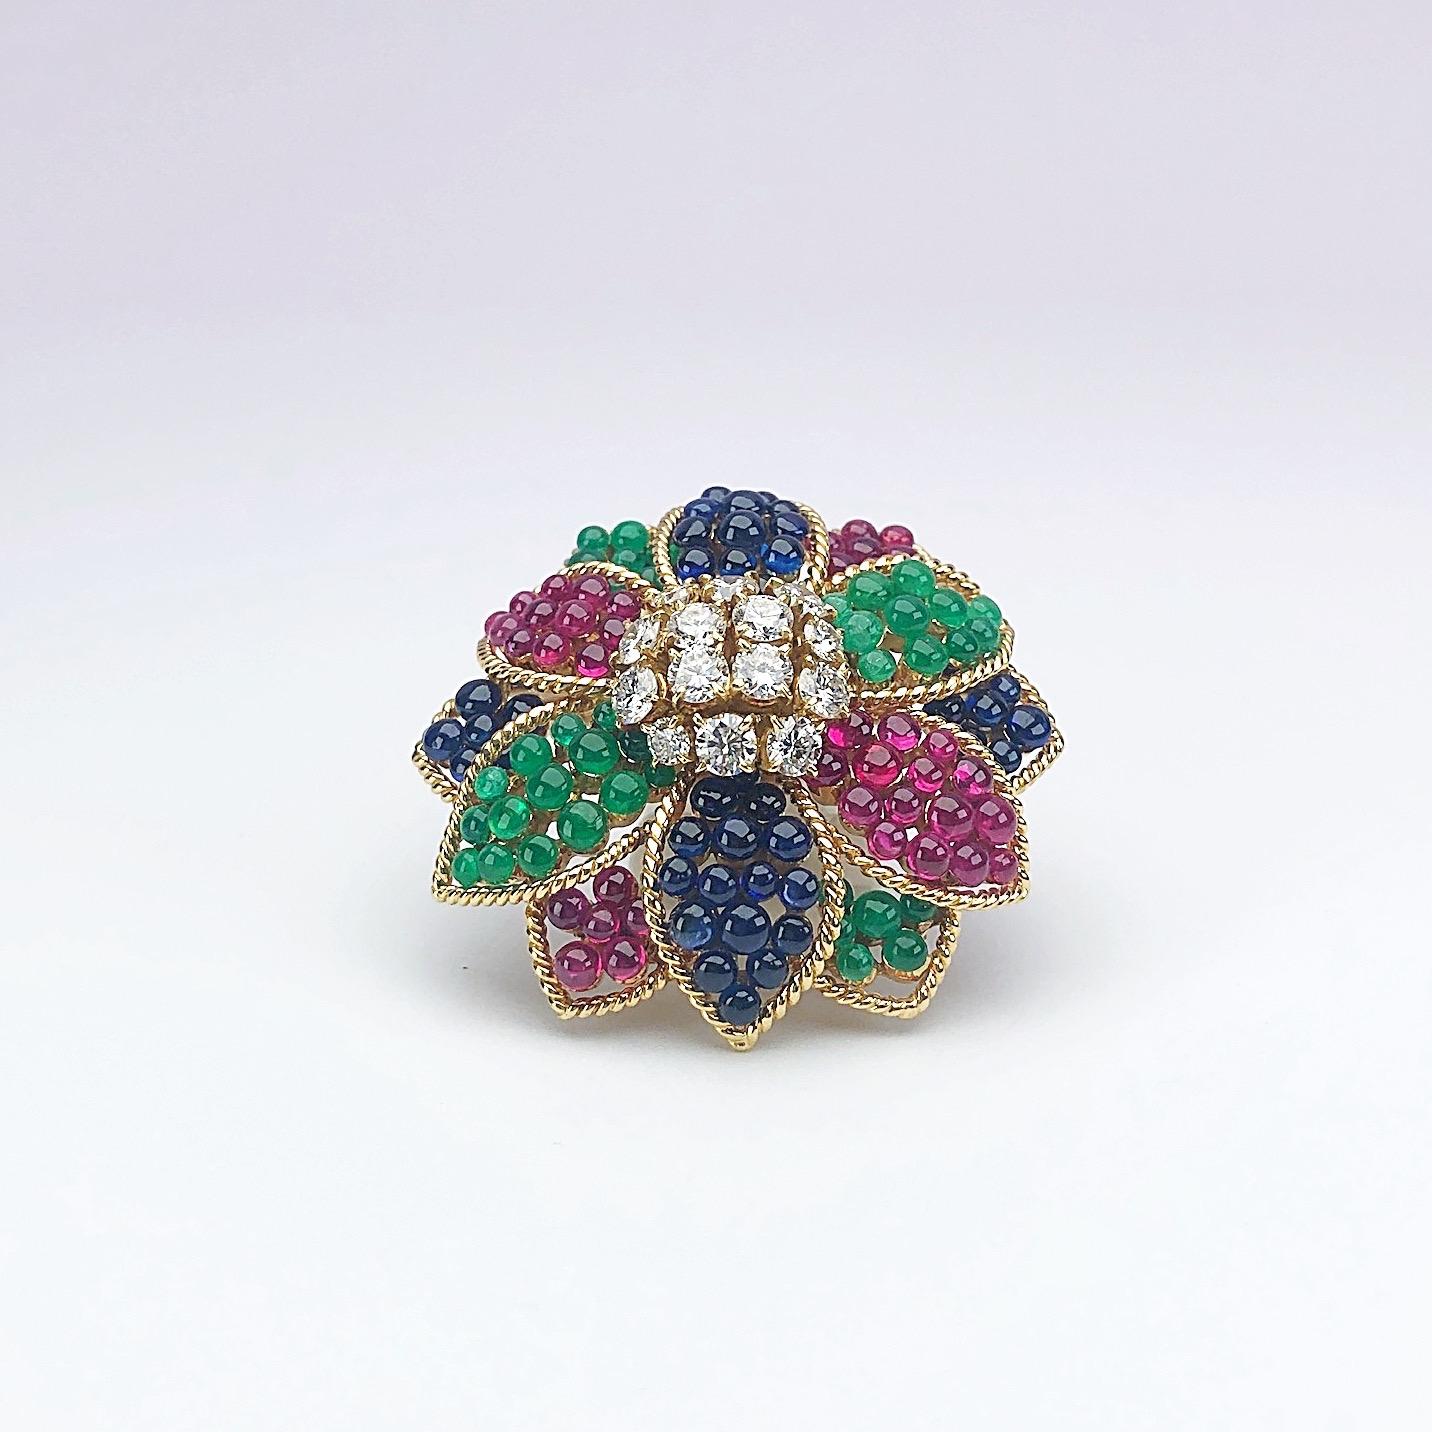 Started in the 1940's Sabbadini of Italy is known throughout the world for their artisinal excellence and creative design.
This unique 18 karat yellow gold flower brooch is a perfect example of their fine craftsmanship. Each petal is set with beaded